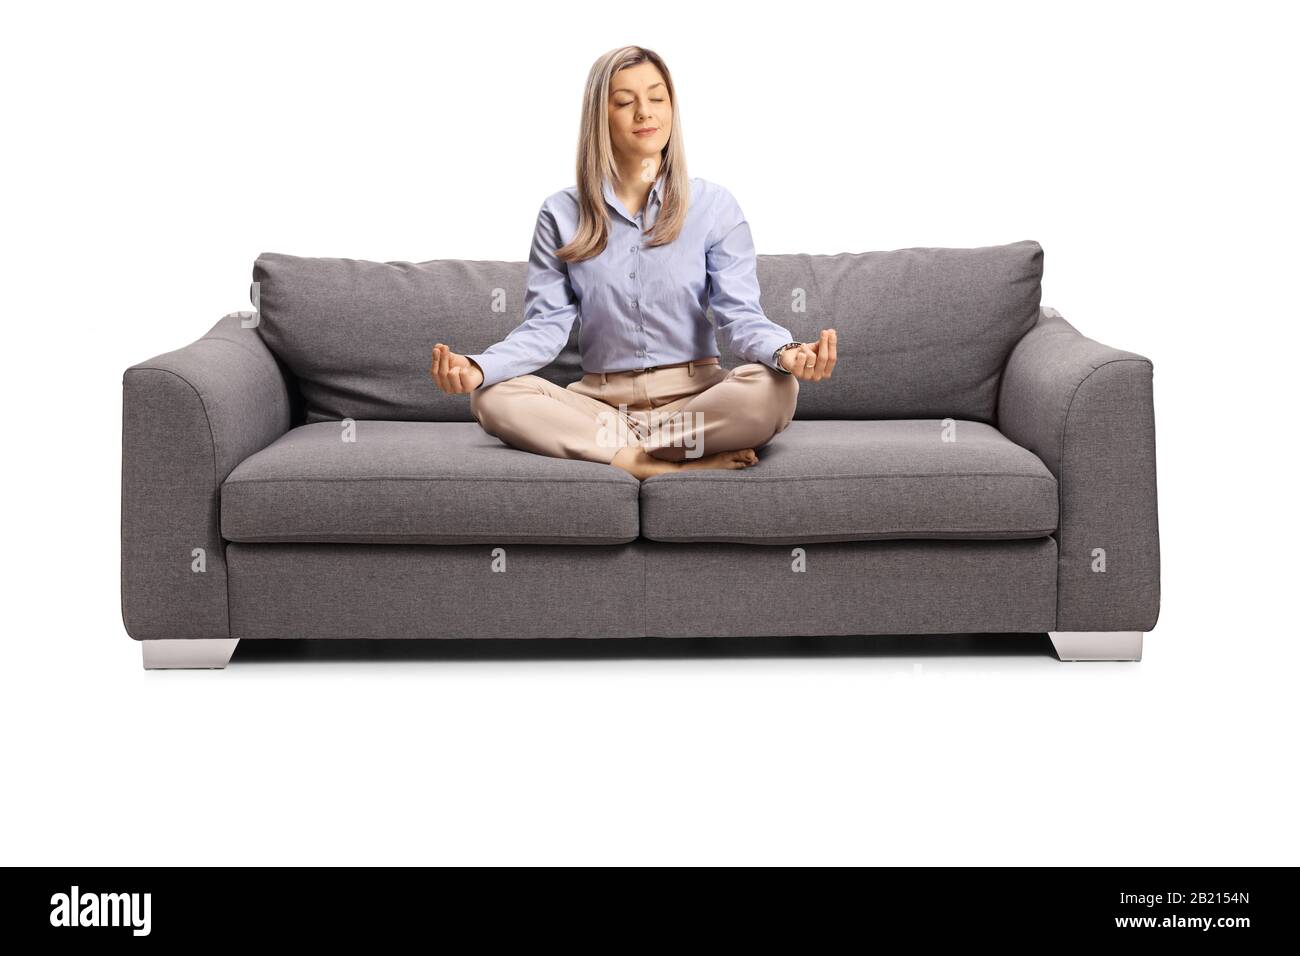 Young woman in formal clothes sitting on a sofa with crossed legs in a meditation pose isolated on white background Stock Photo